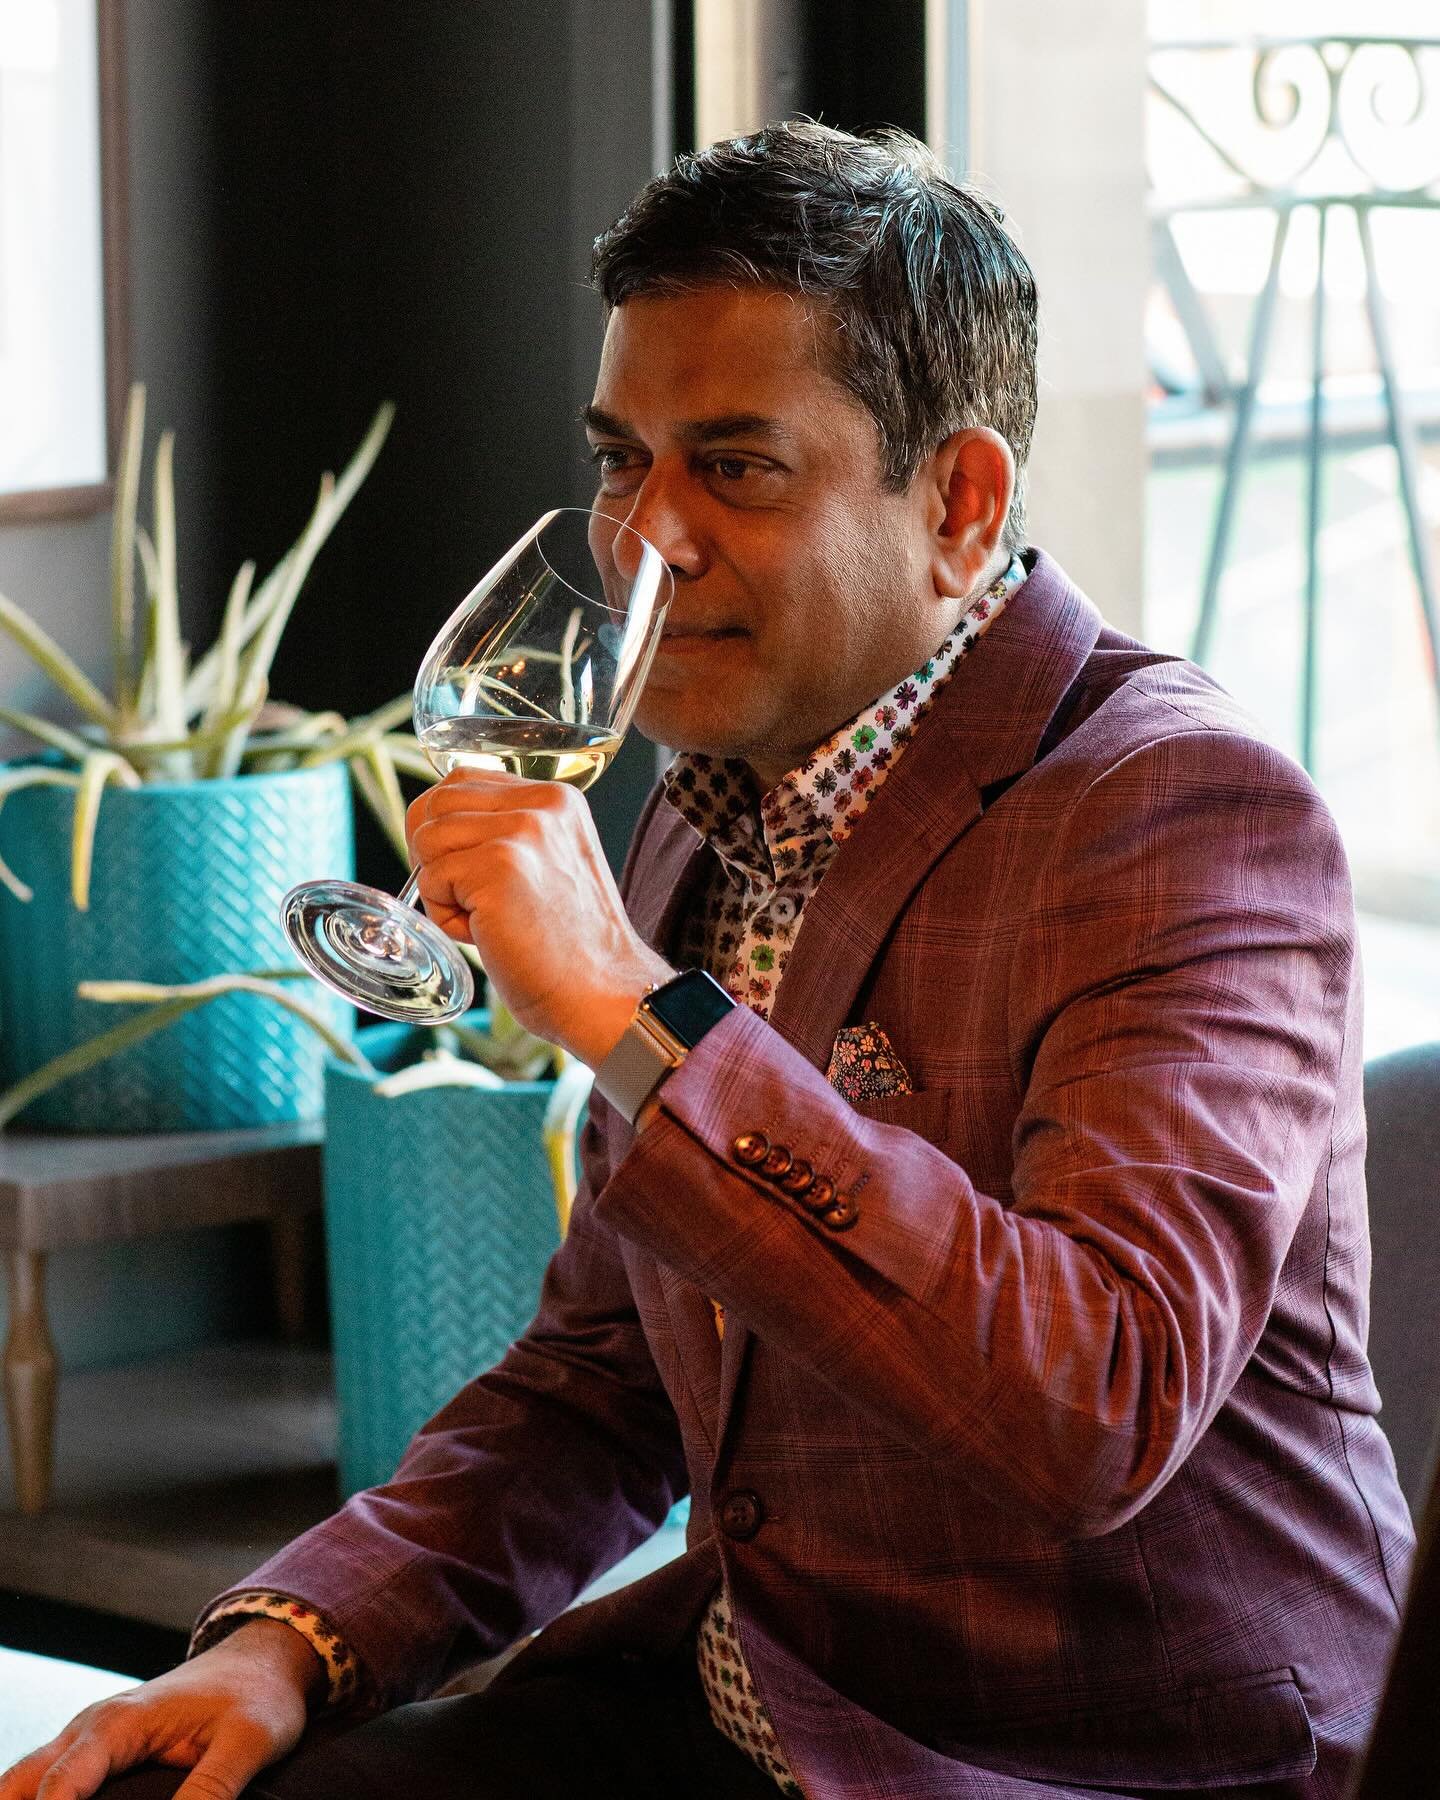 This Wednesday, May 15th we invite you to join us for our NEW wine program hosted by @sommelier.ray, a bi-weekly interactive experience for the wine lovers and connoisseurs alike. 

Enjoy wine flights, great conversation and learn about our vast arra